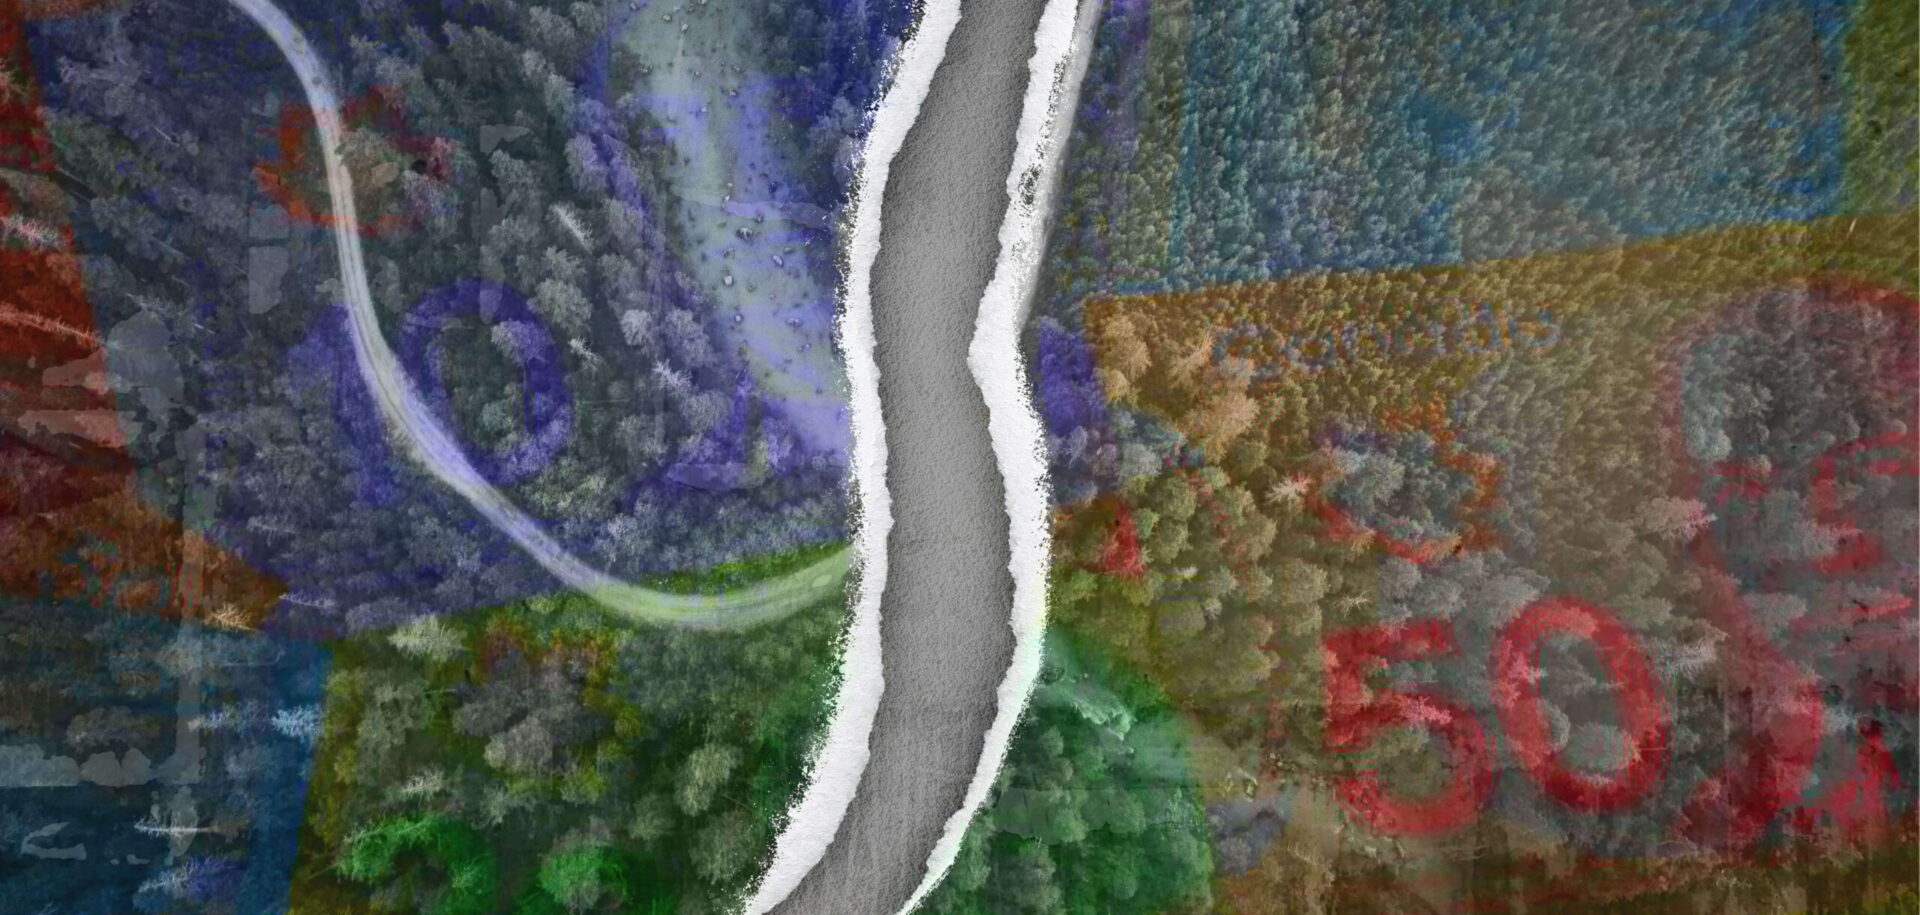 A decorative collage of an abstract road over an aerial view of a boreal forest.